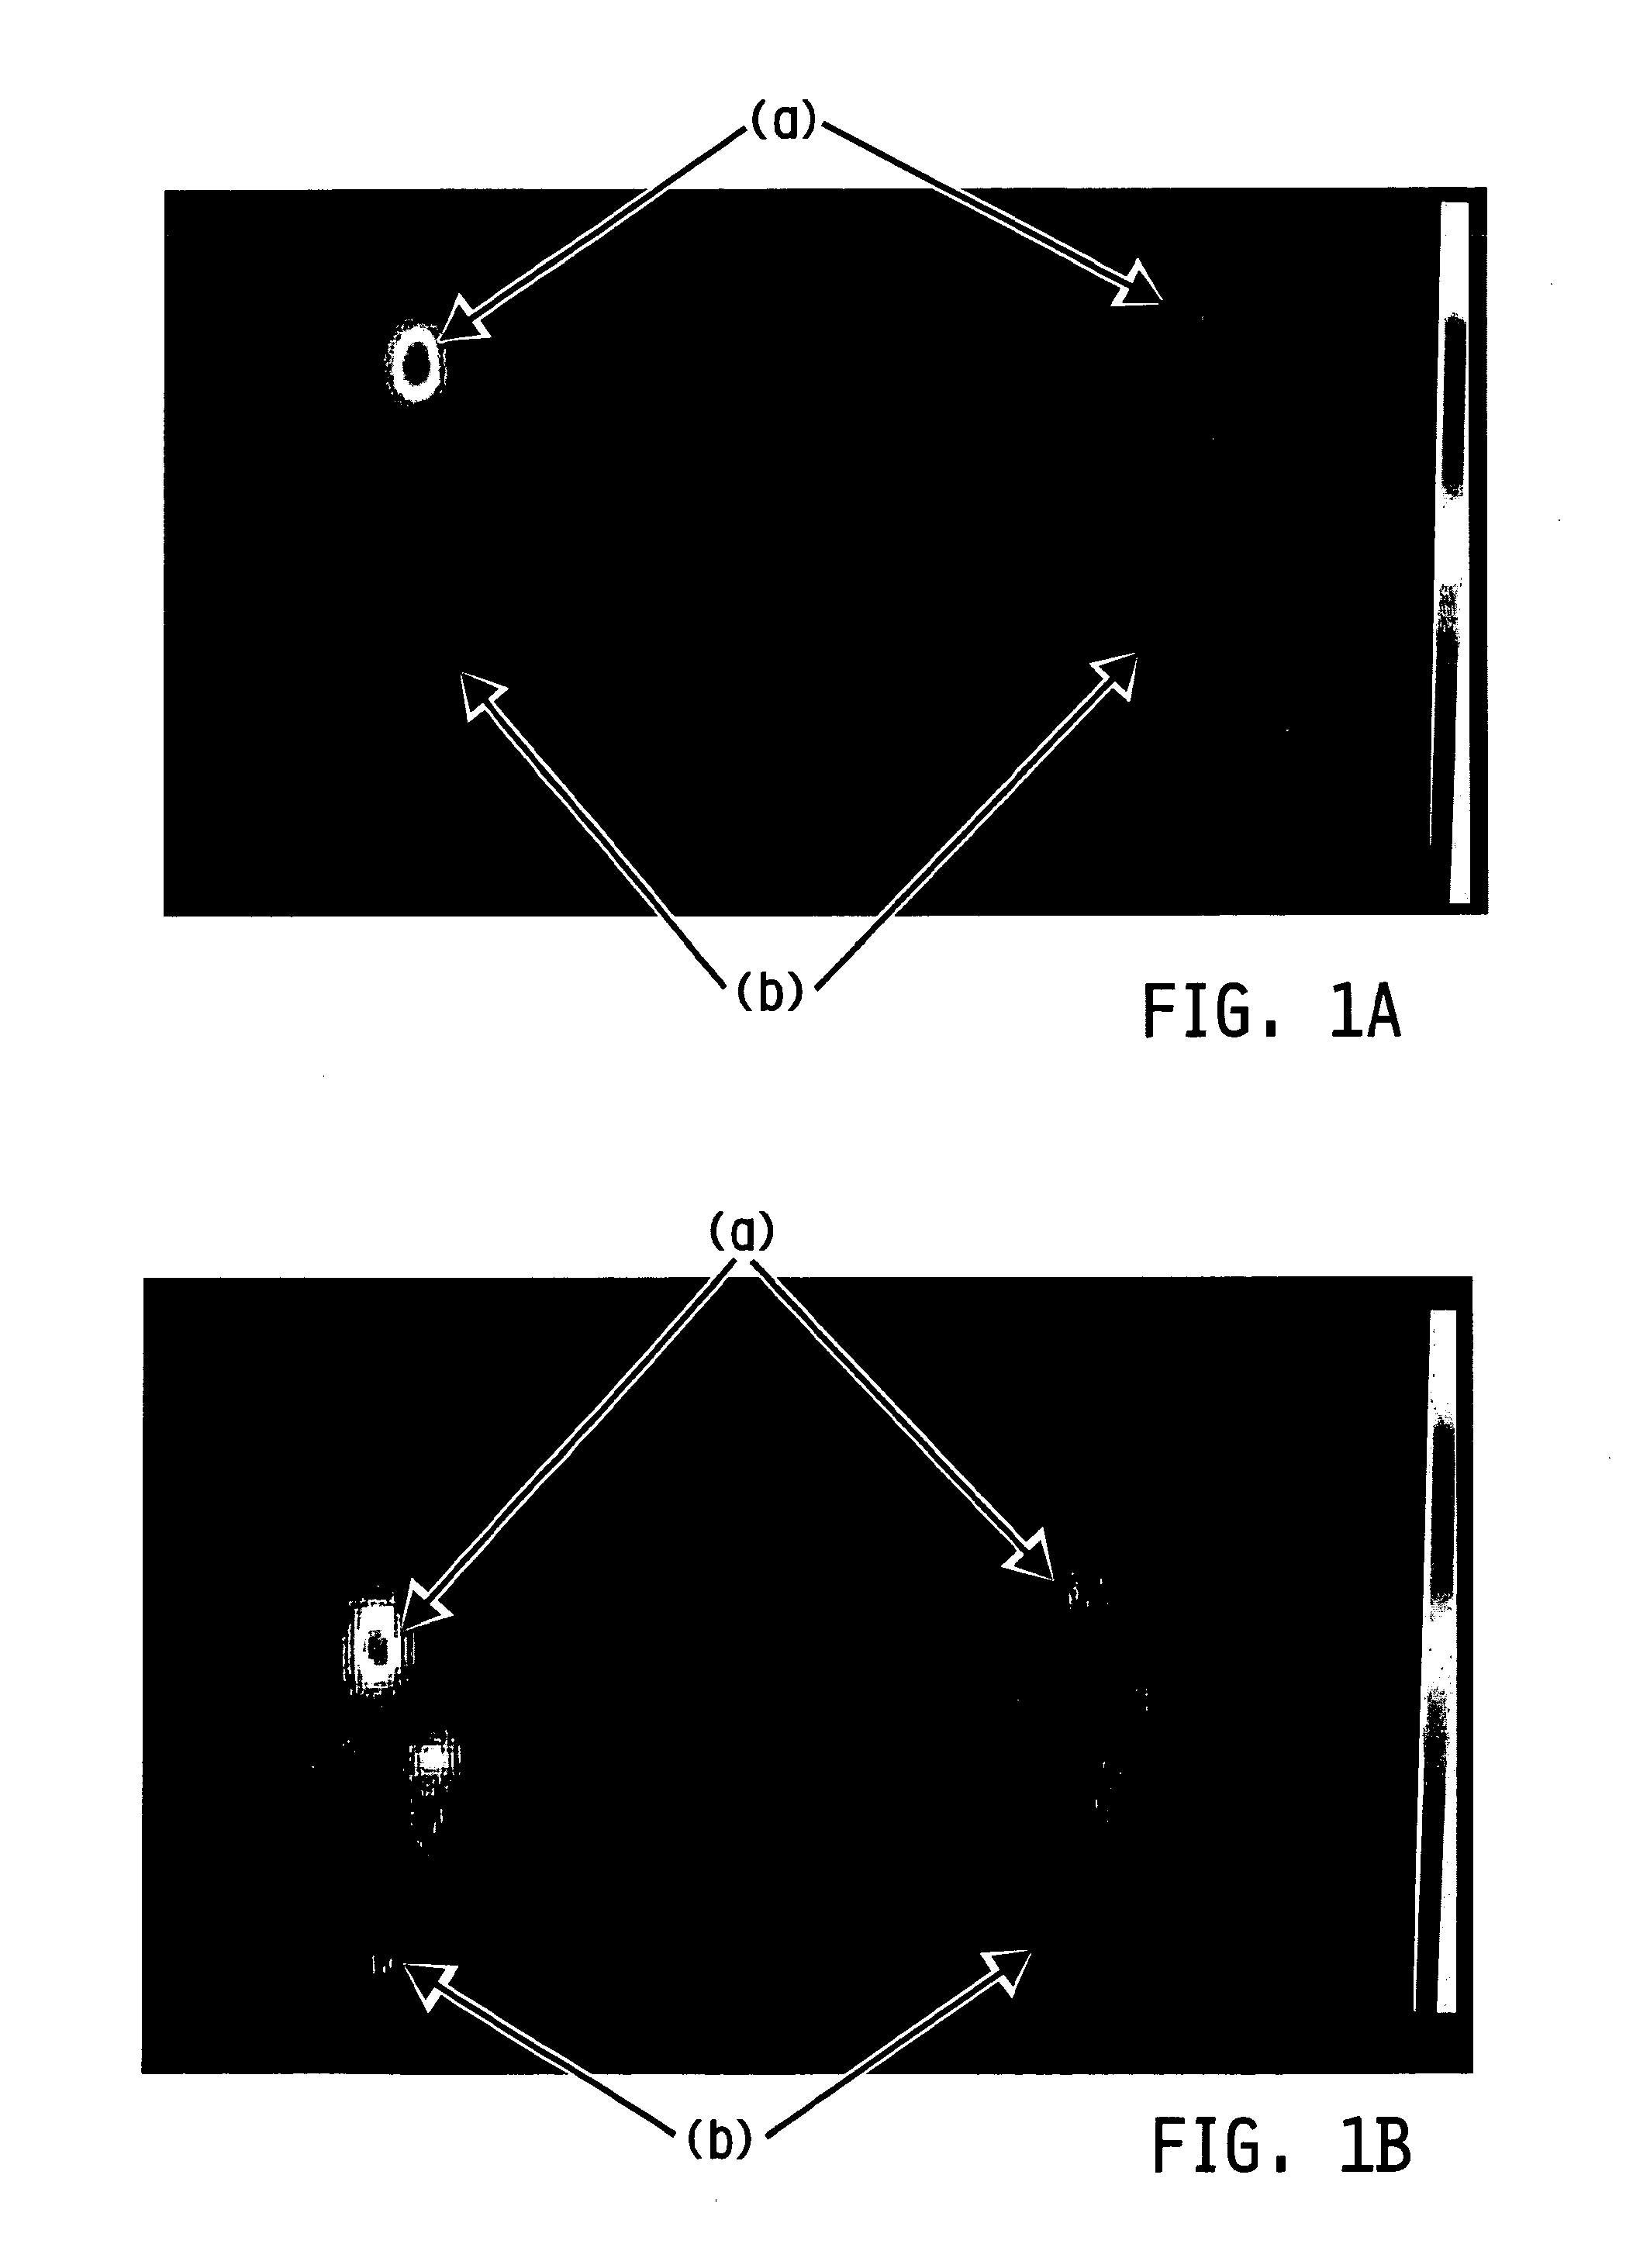 Method of imaging localized infections